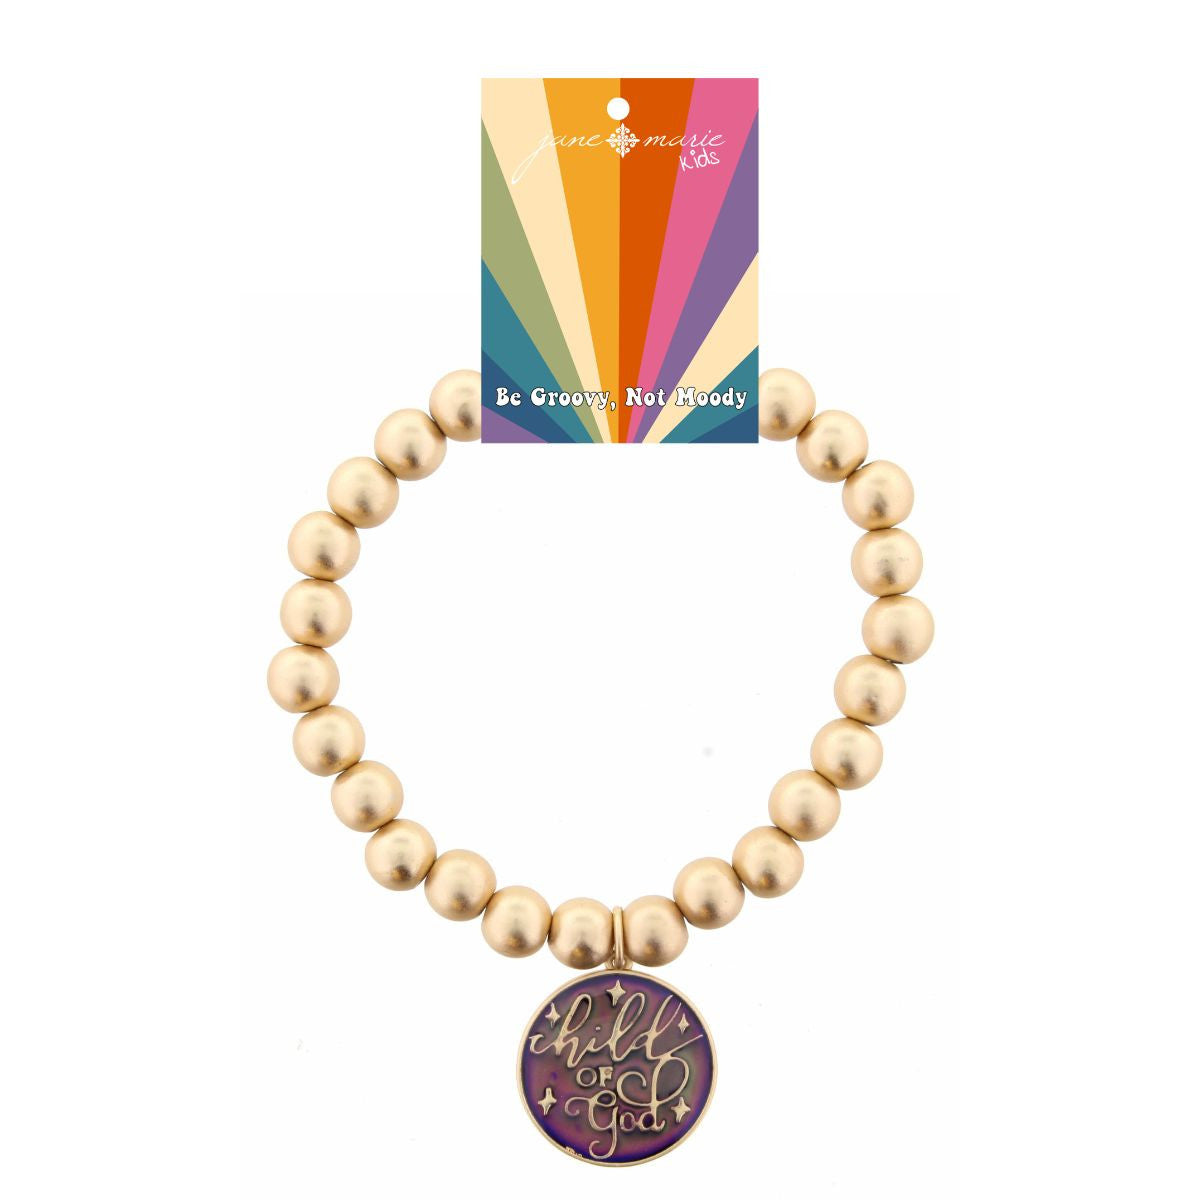 Kid's Gold Beaded Stretch with Mood Changing Circle "Child of God" Bracelet